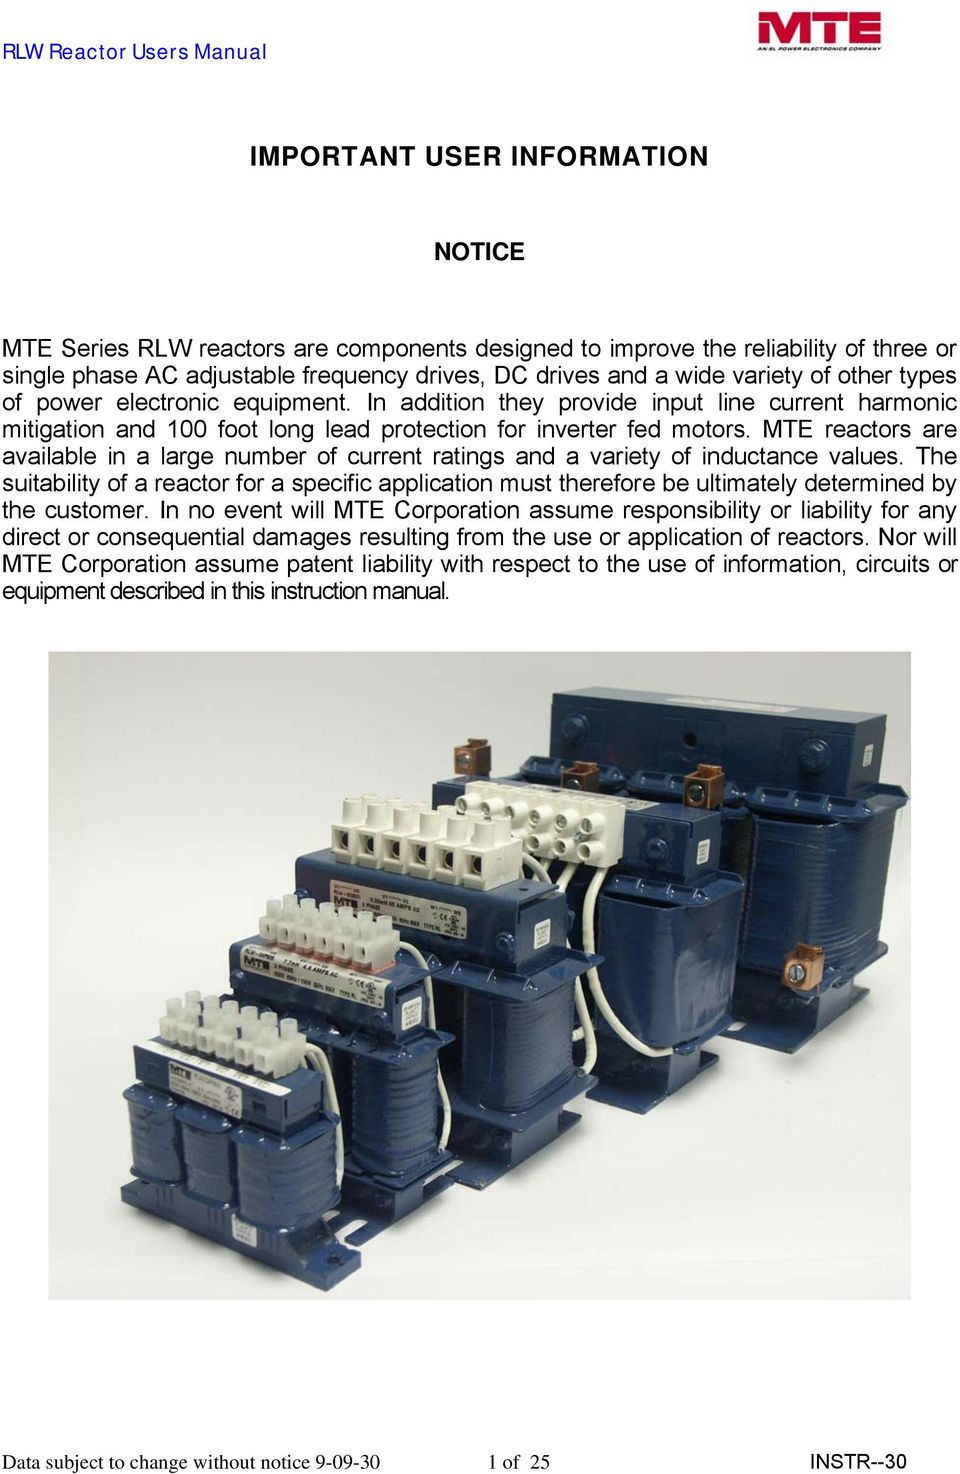 MTE reactors are available in a large number of current ratings and a variety of inductance values.